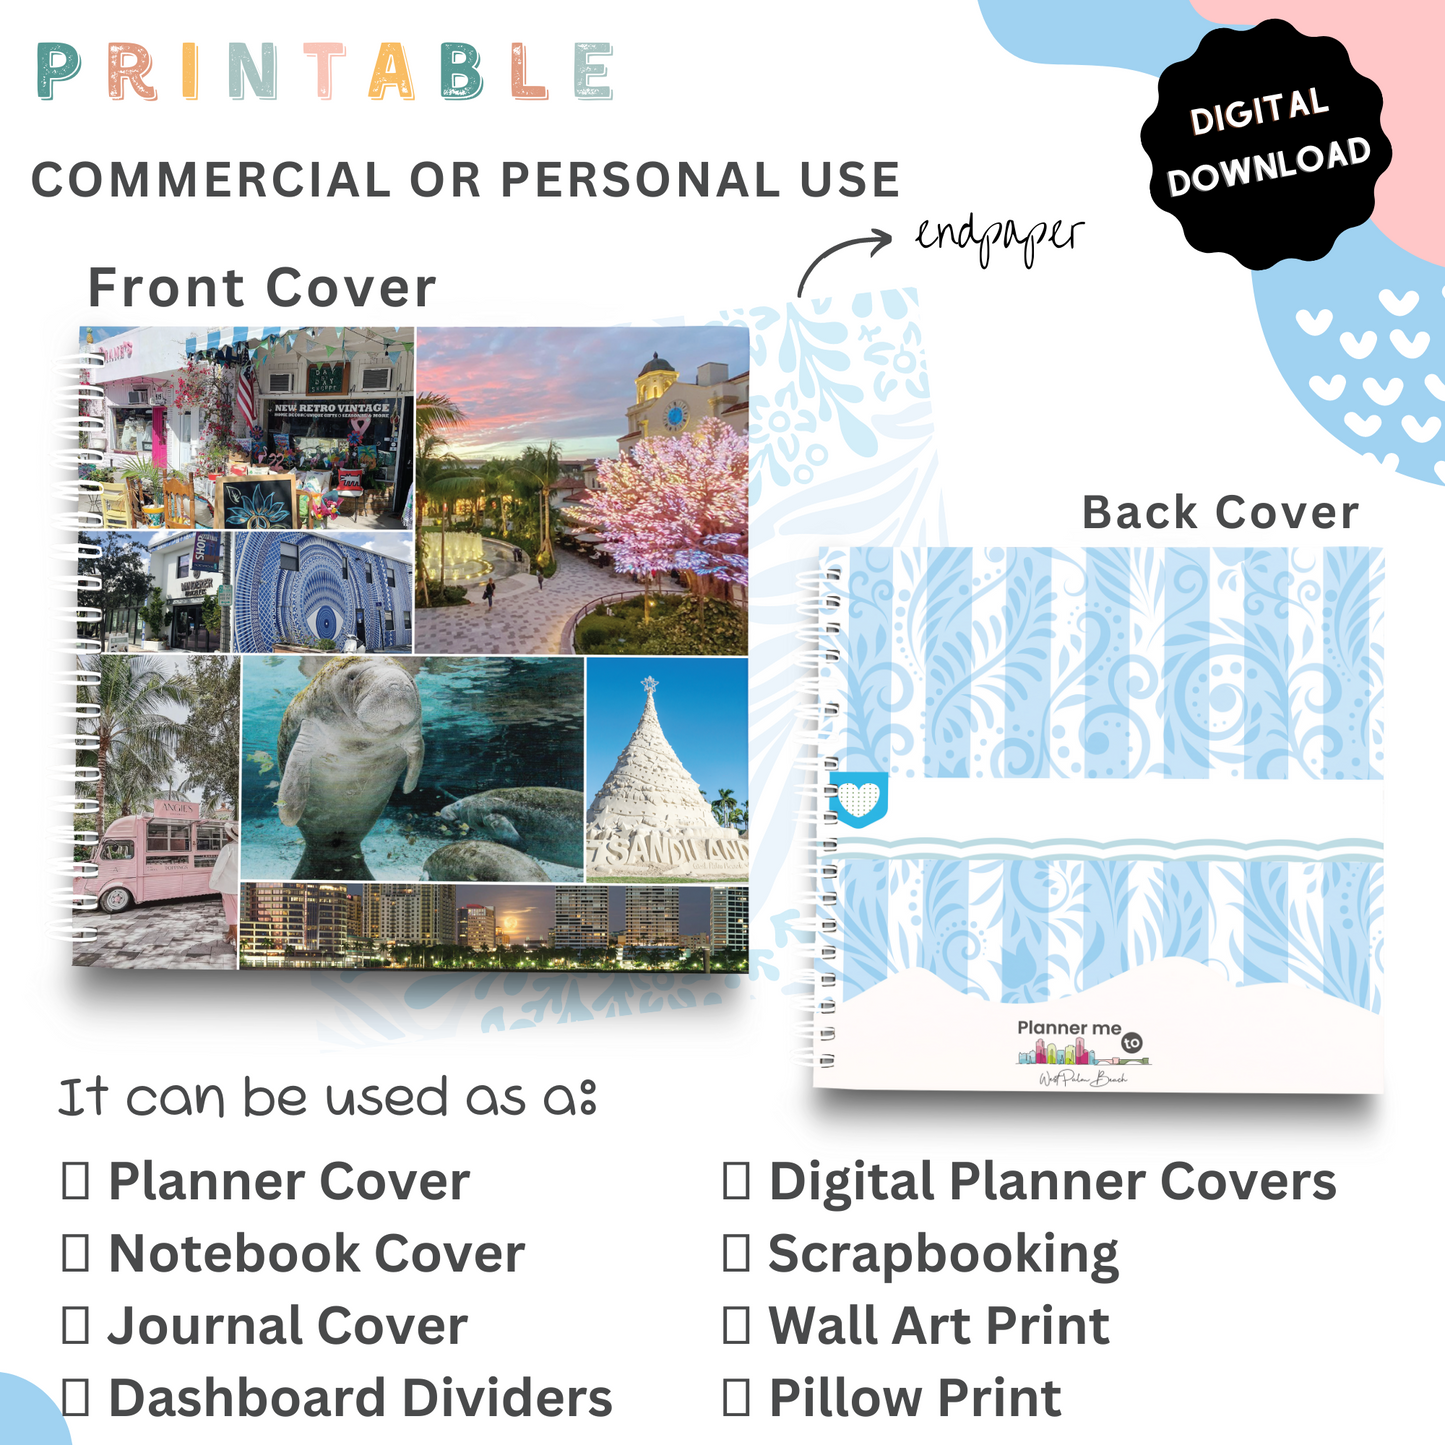 IVANA MATTHEWS´S Planner me to - Printable Planner, Journal & Notepad Cover